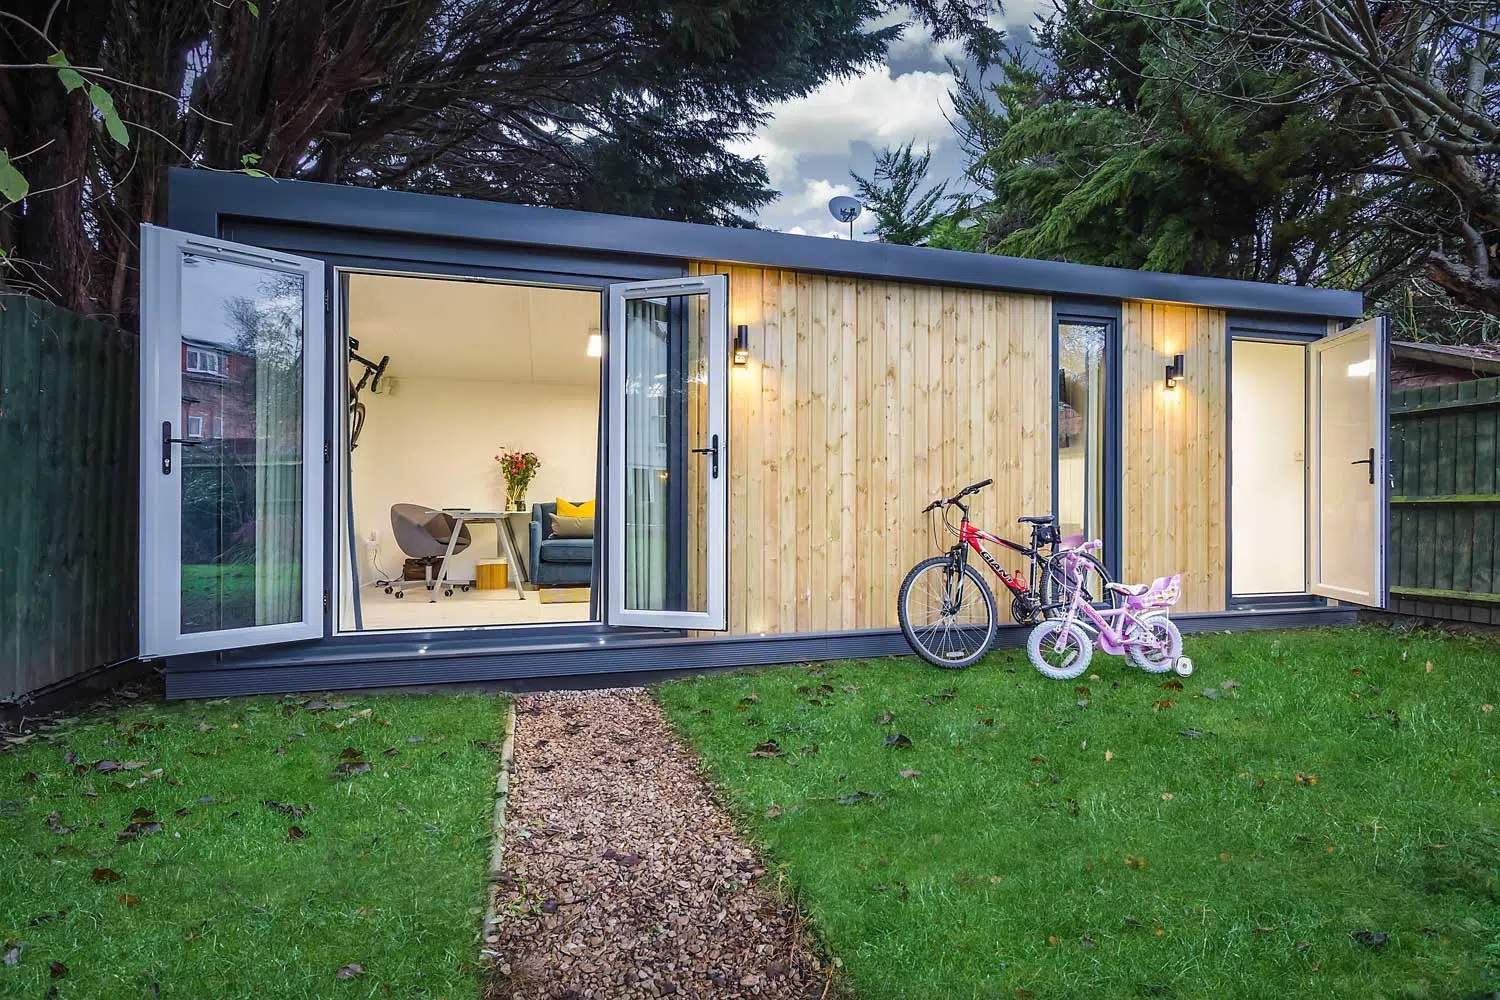 Garden Rooms with Shed Storage: How to Add Extra Living Space and Storage to Your Yard